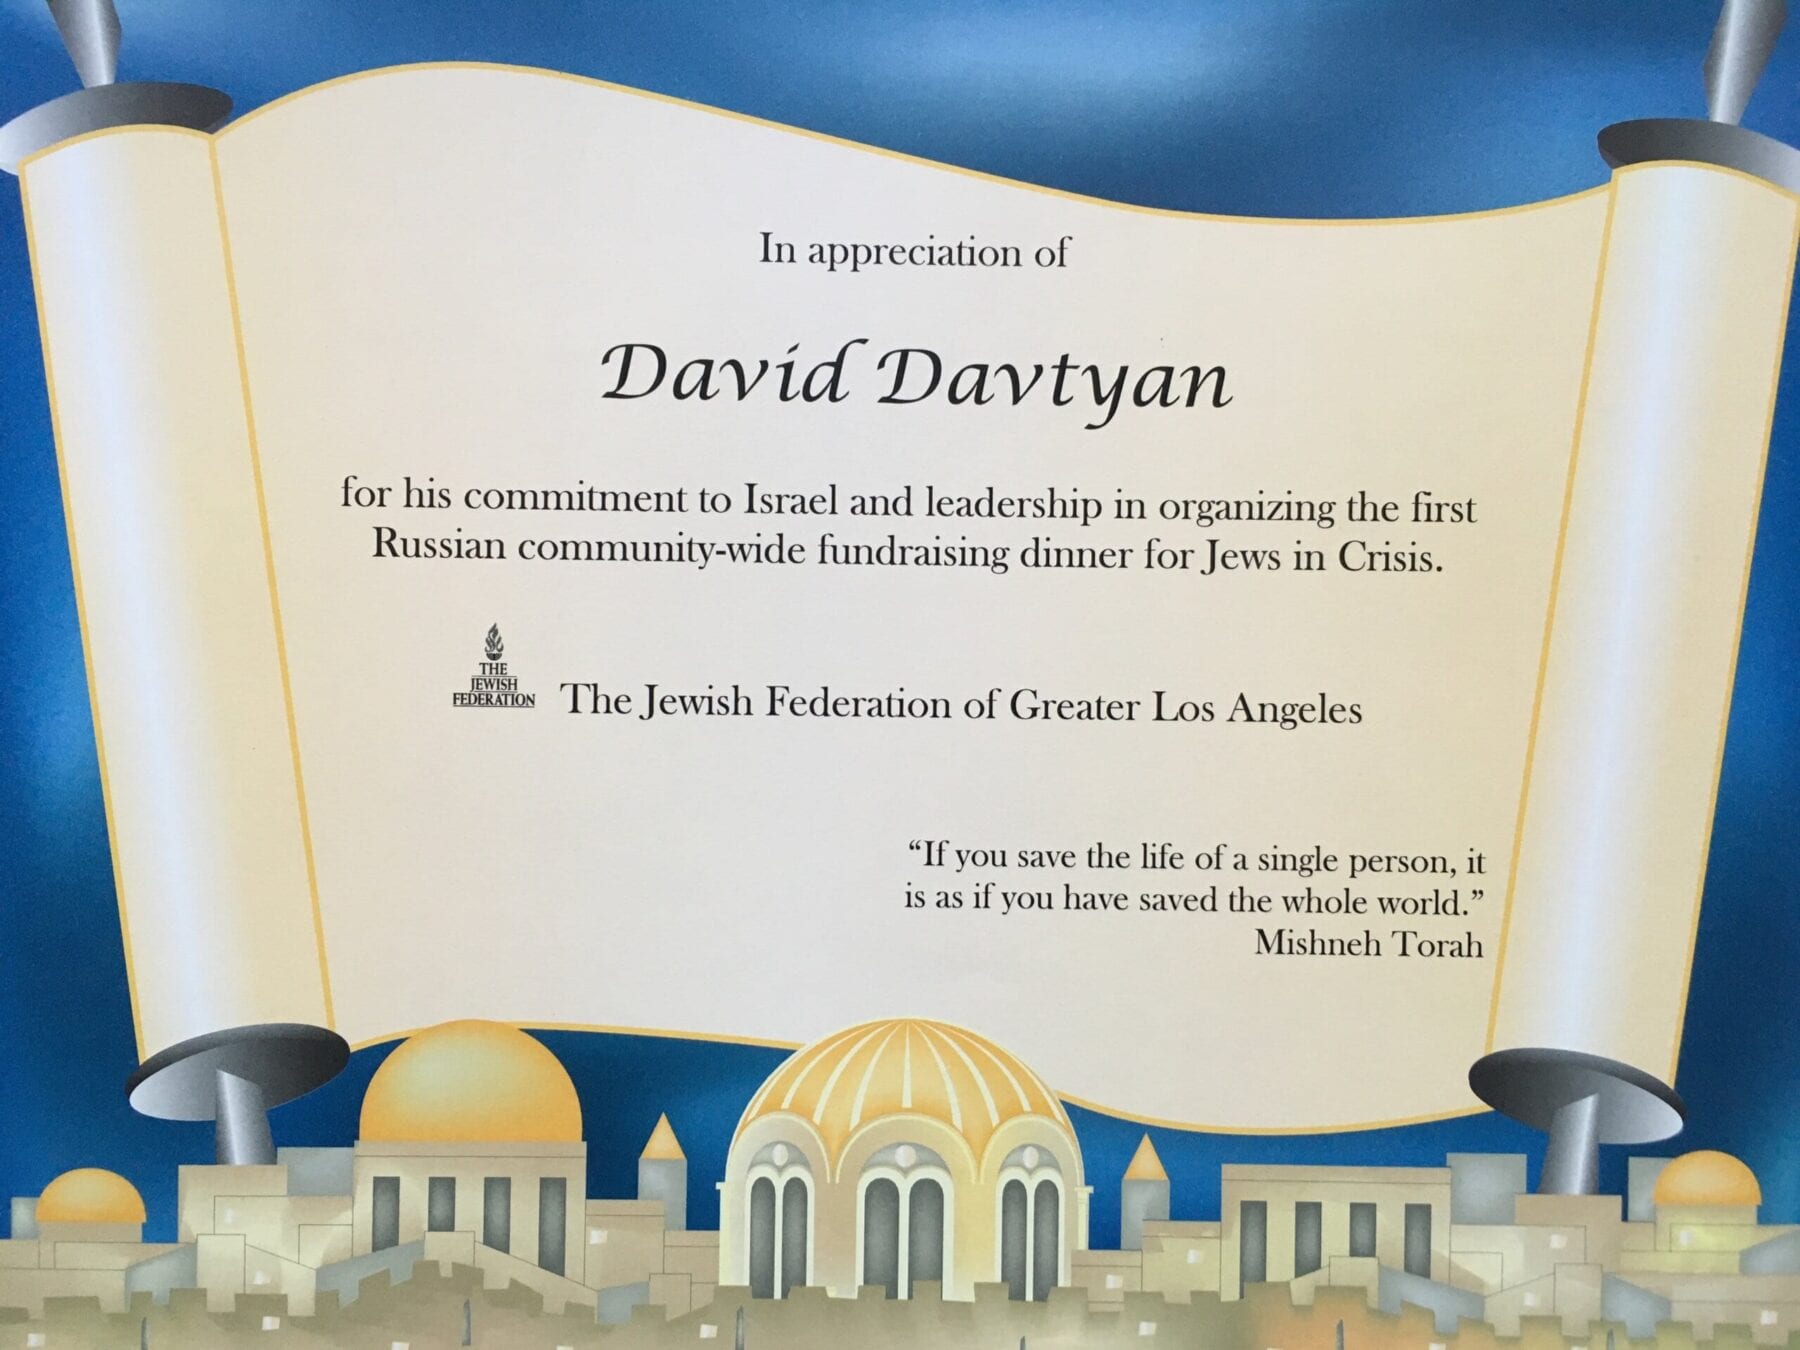 Dr. David Davtyan's Certificate Of Appreciation For Organizing The First Russian Community-Wide Fundraising Dinner For Jews In Christ 